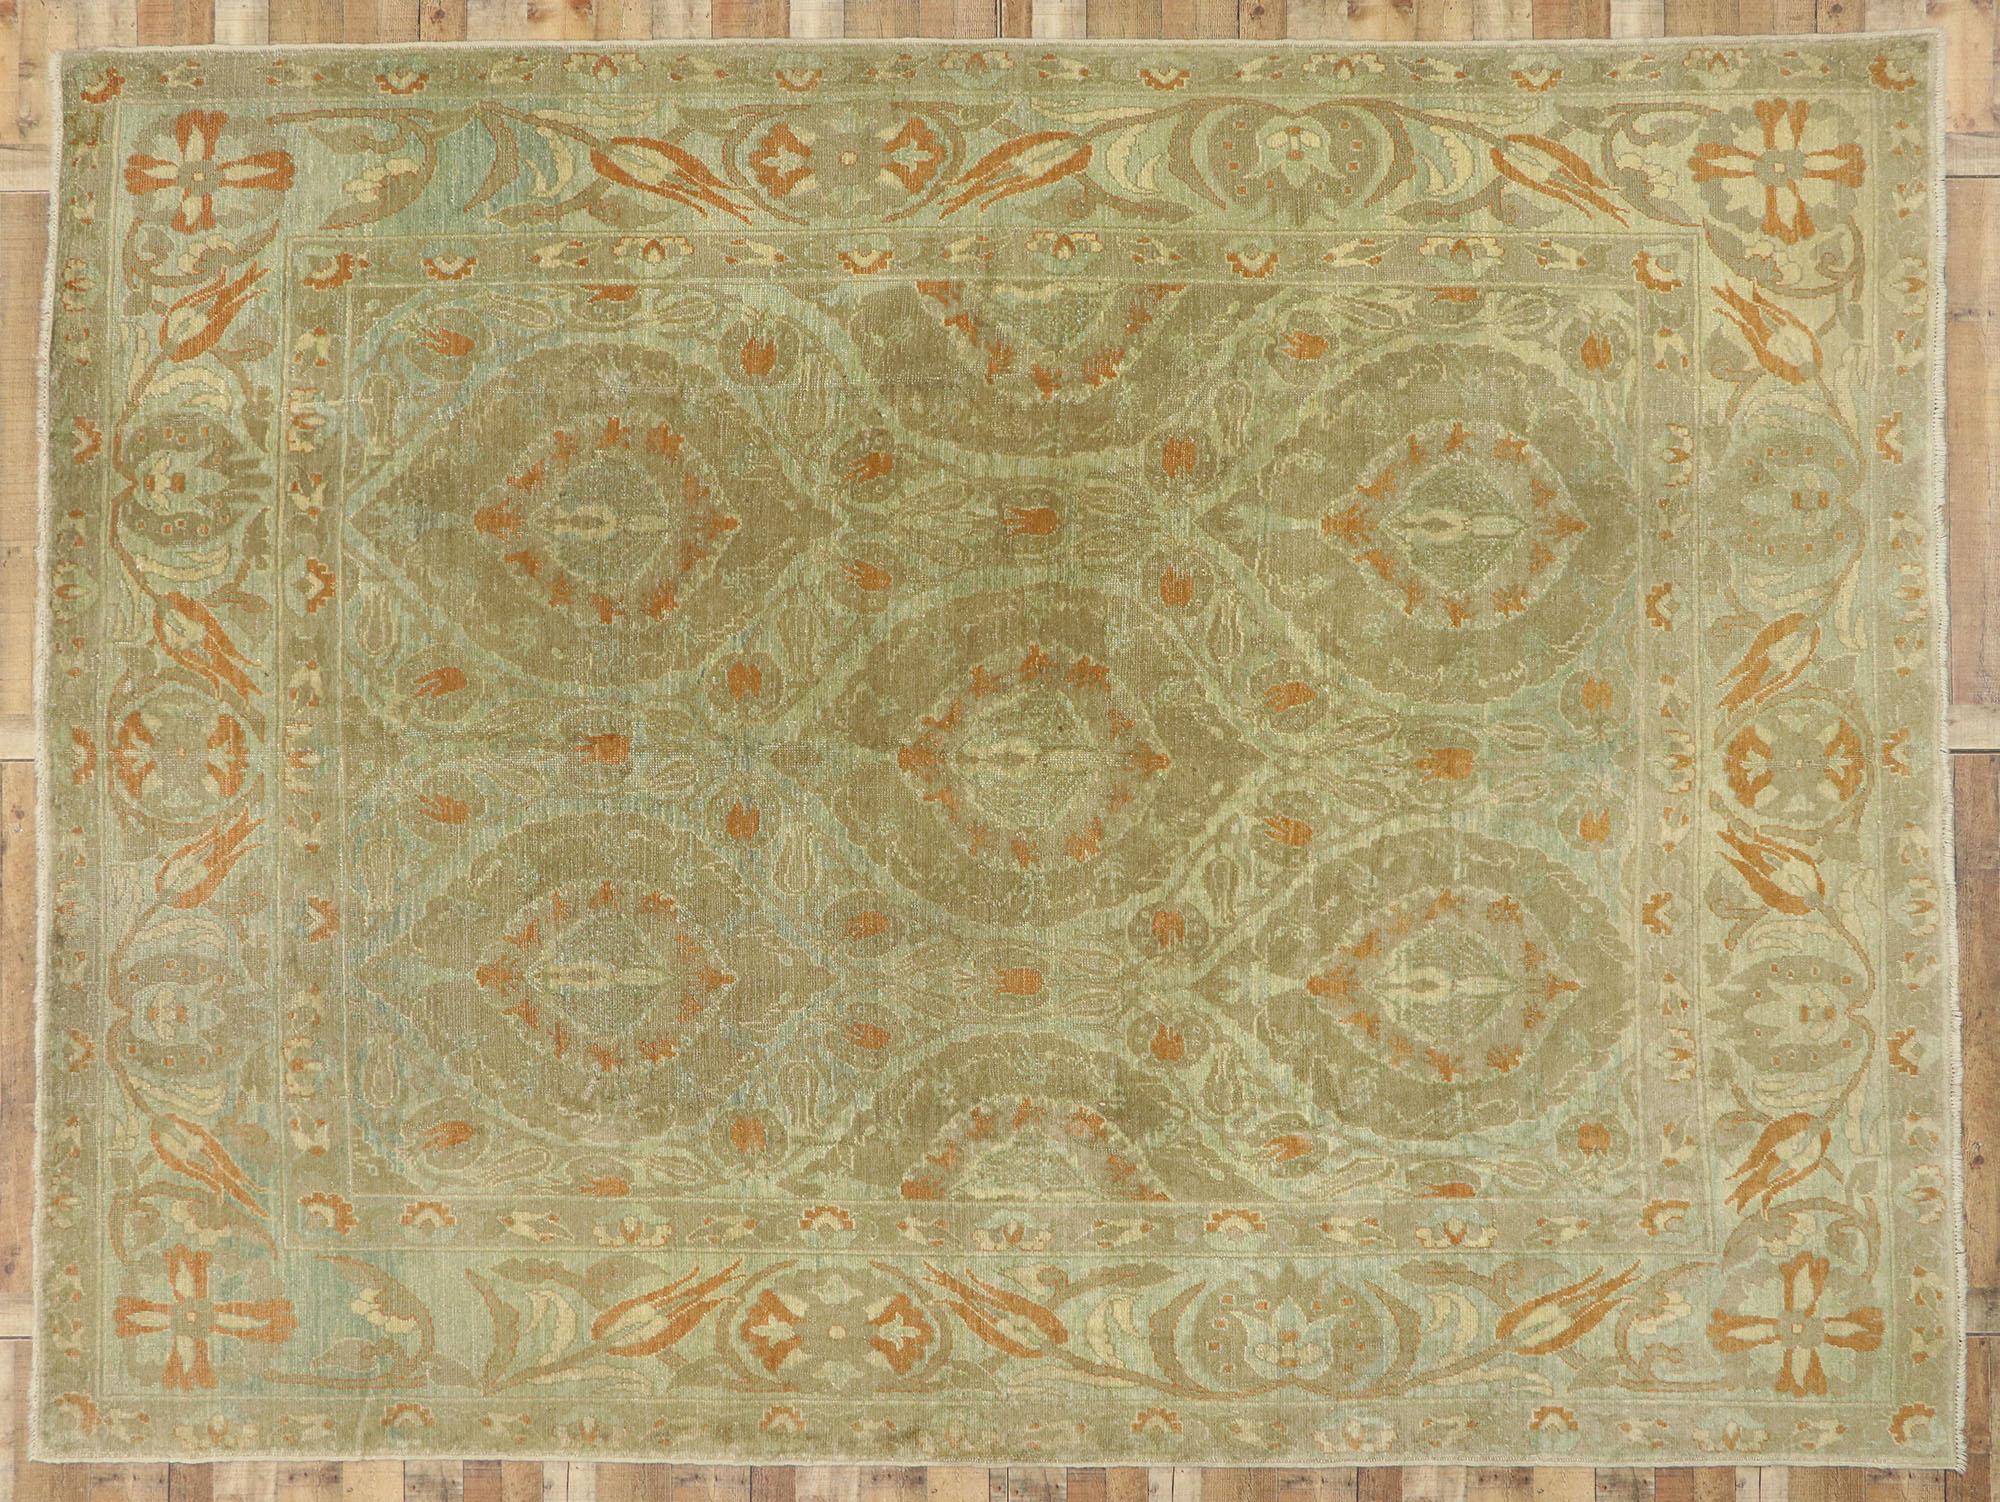 New Turkish Oushak Rug with Arts & Crafts Style Inspired by William Morris For Sale 2